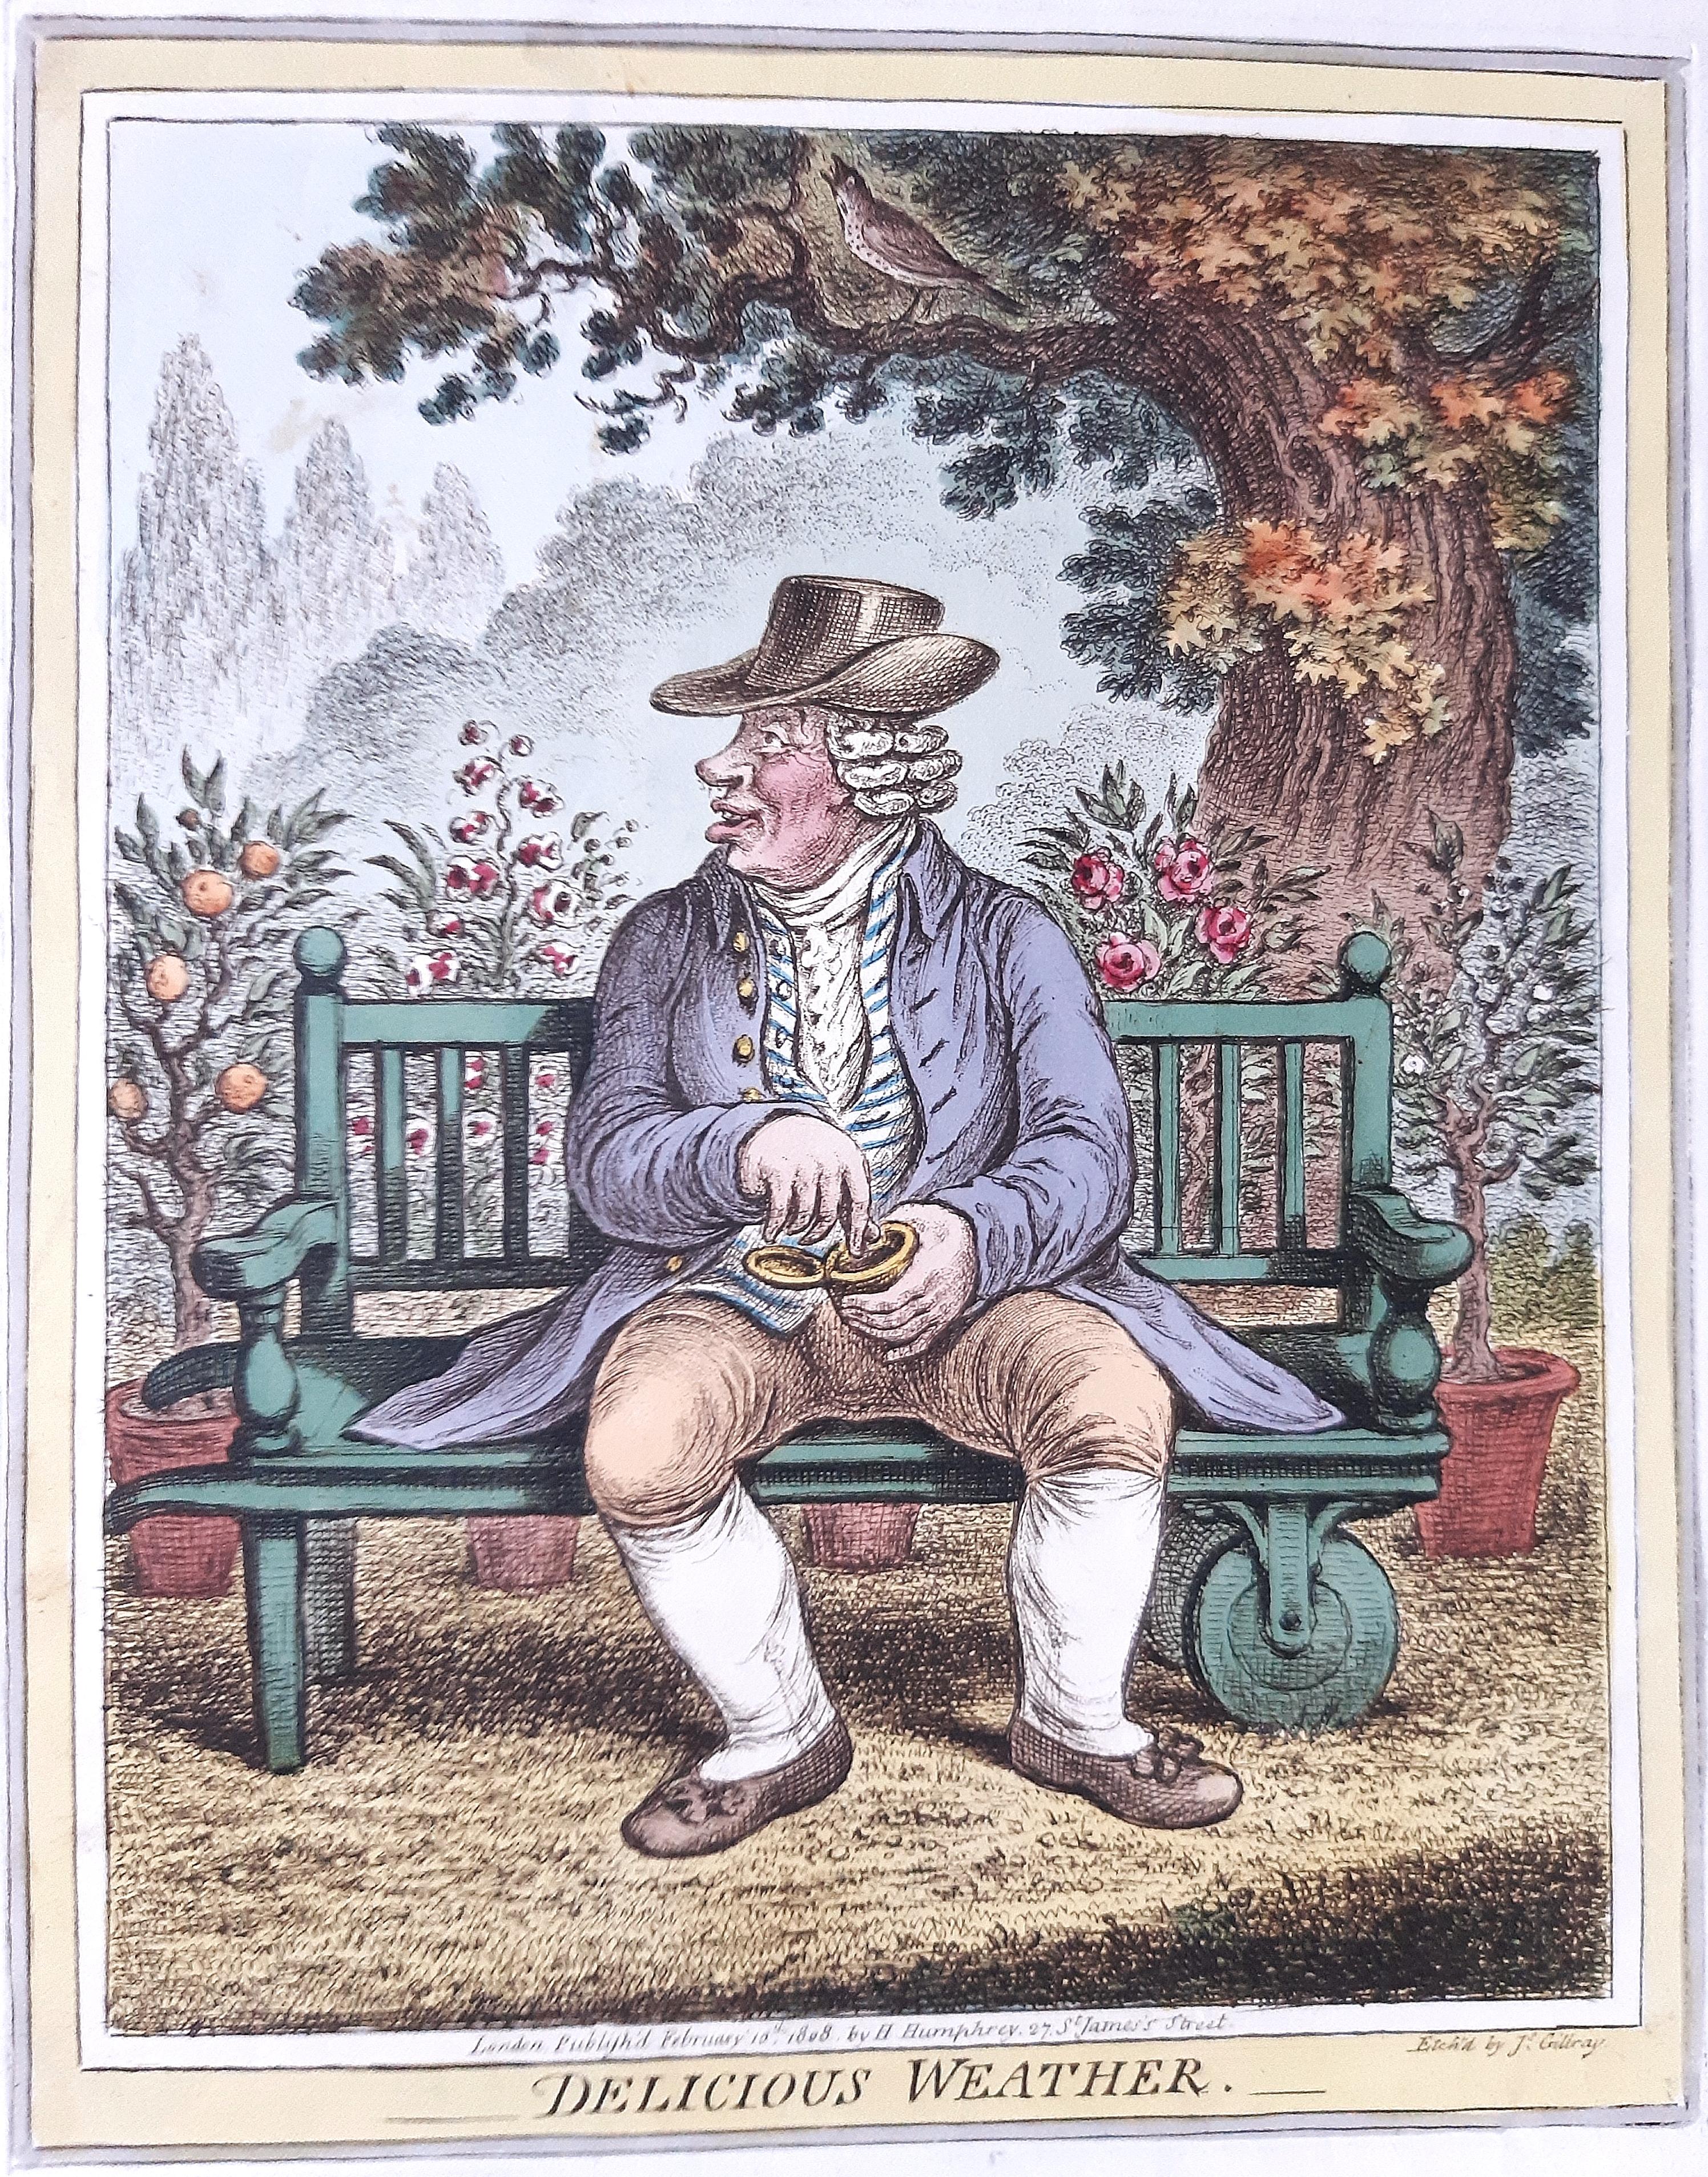 Delicious Weather - Complete Series of 5 Hand-colored Etchings - 1808 - Gray Figurative Print by James Gillray